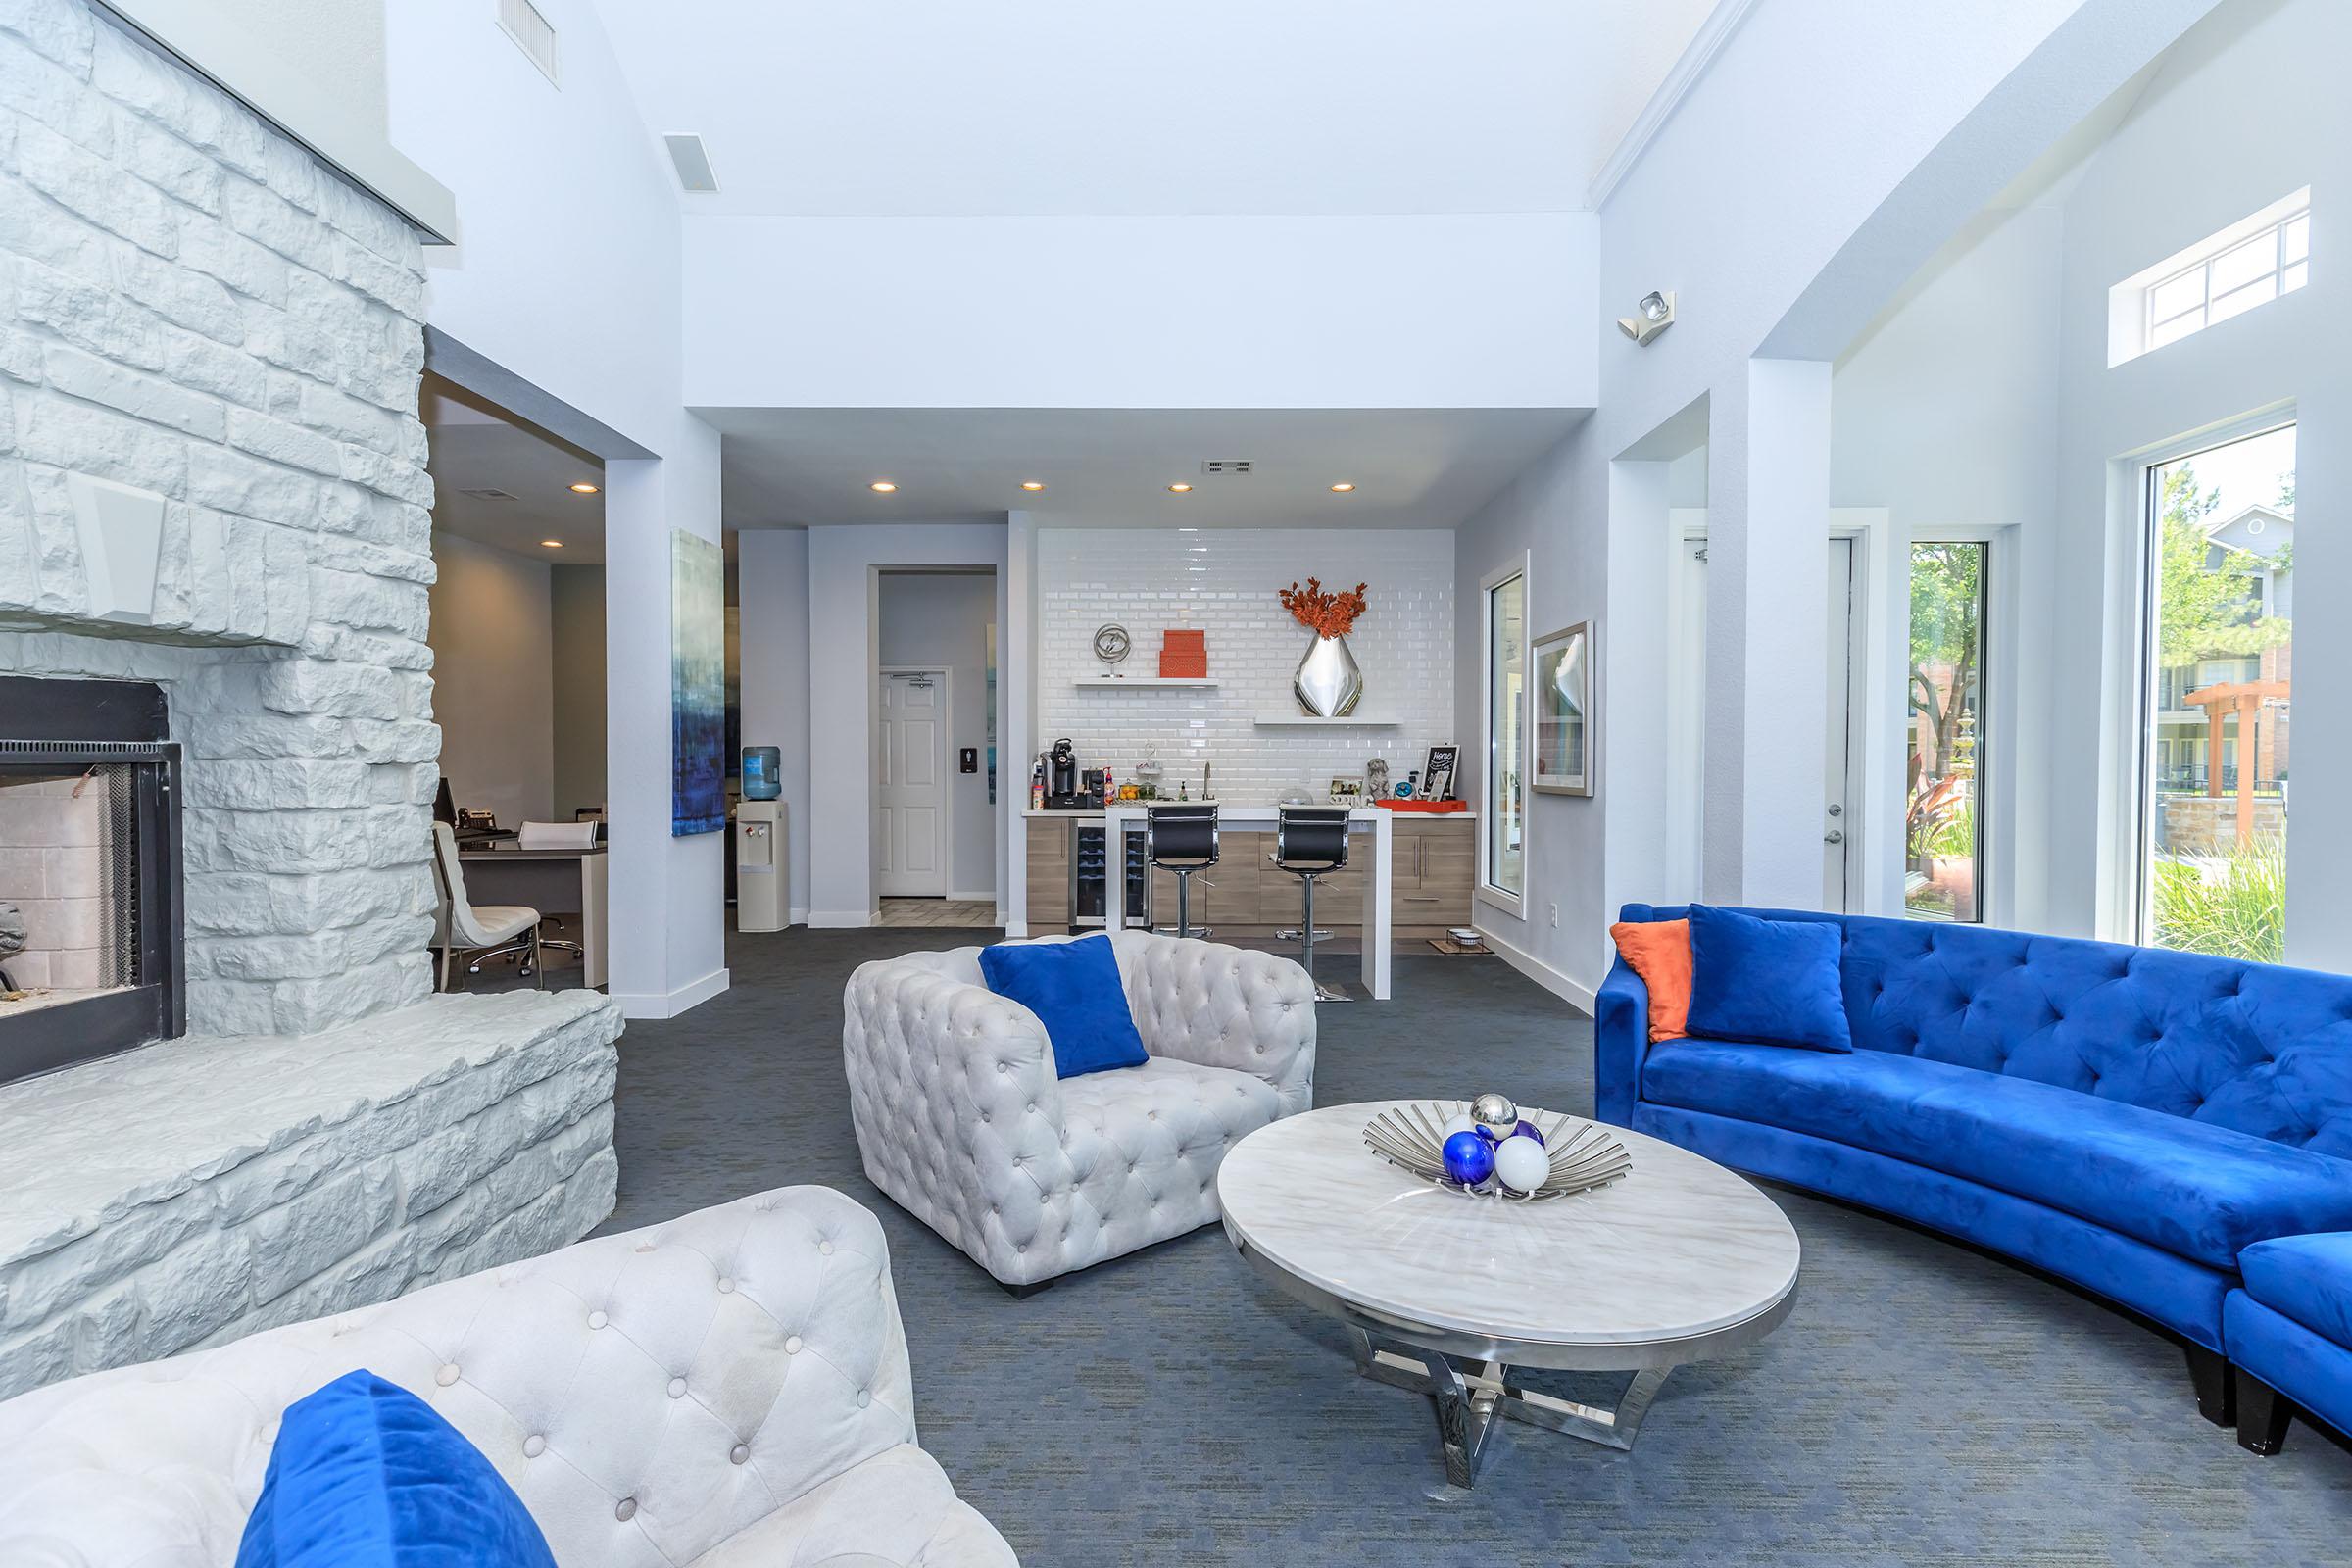 community room with a blue couch